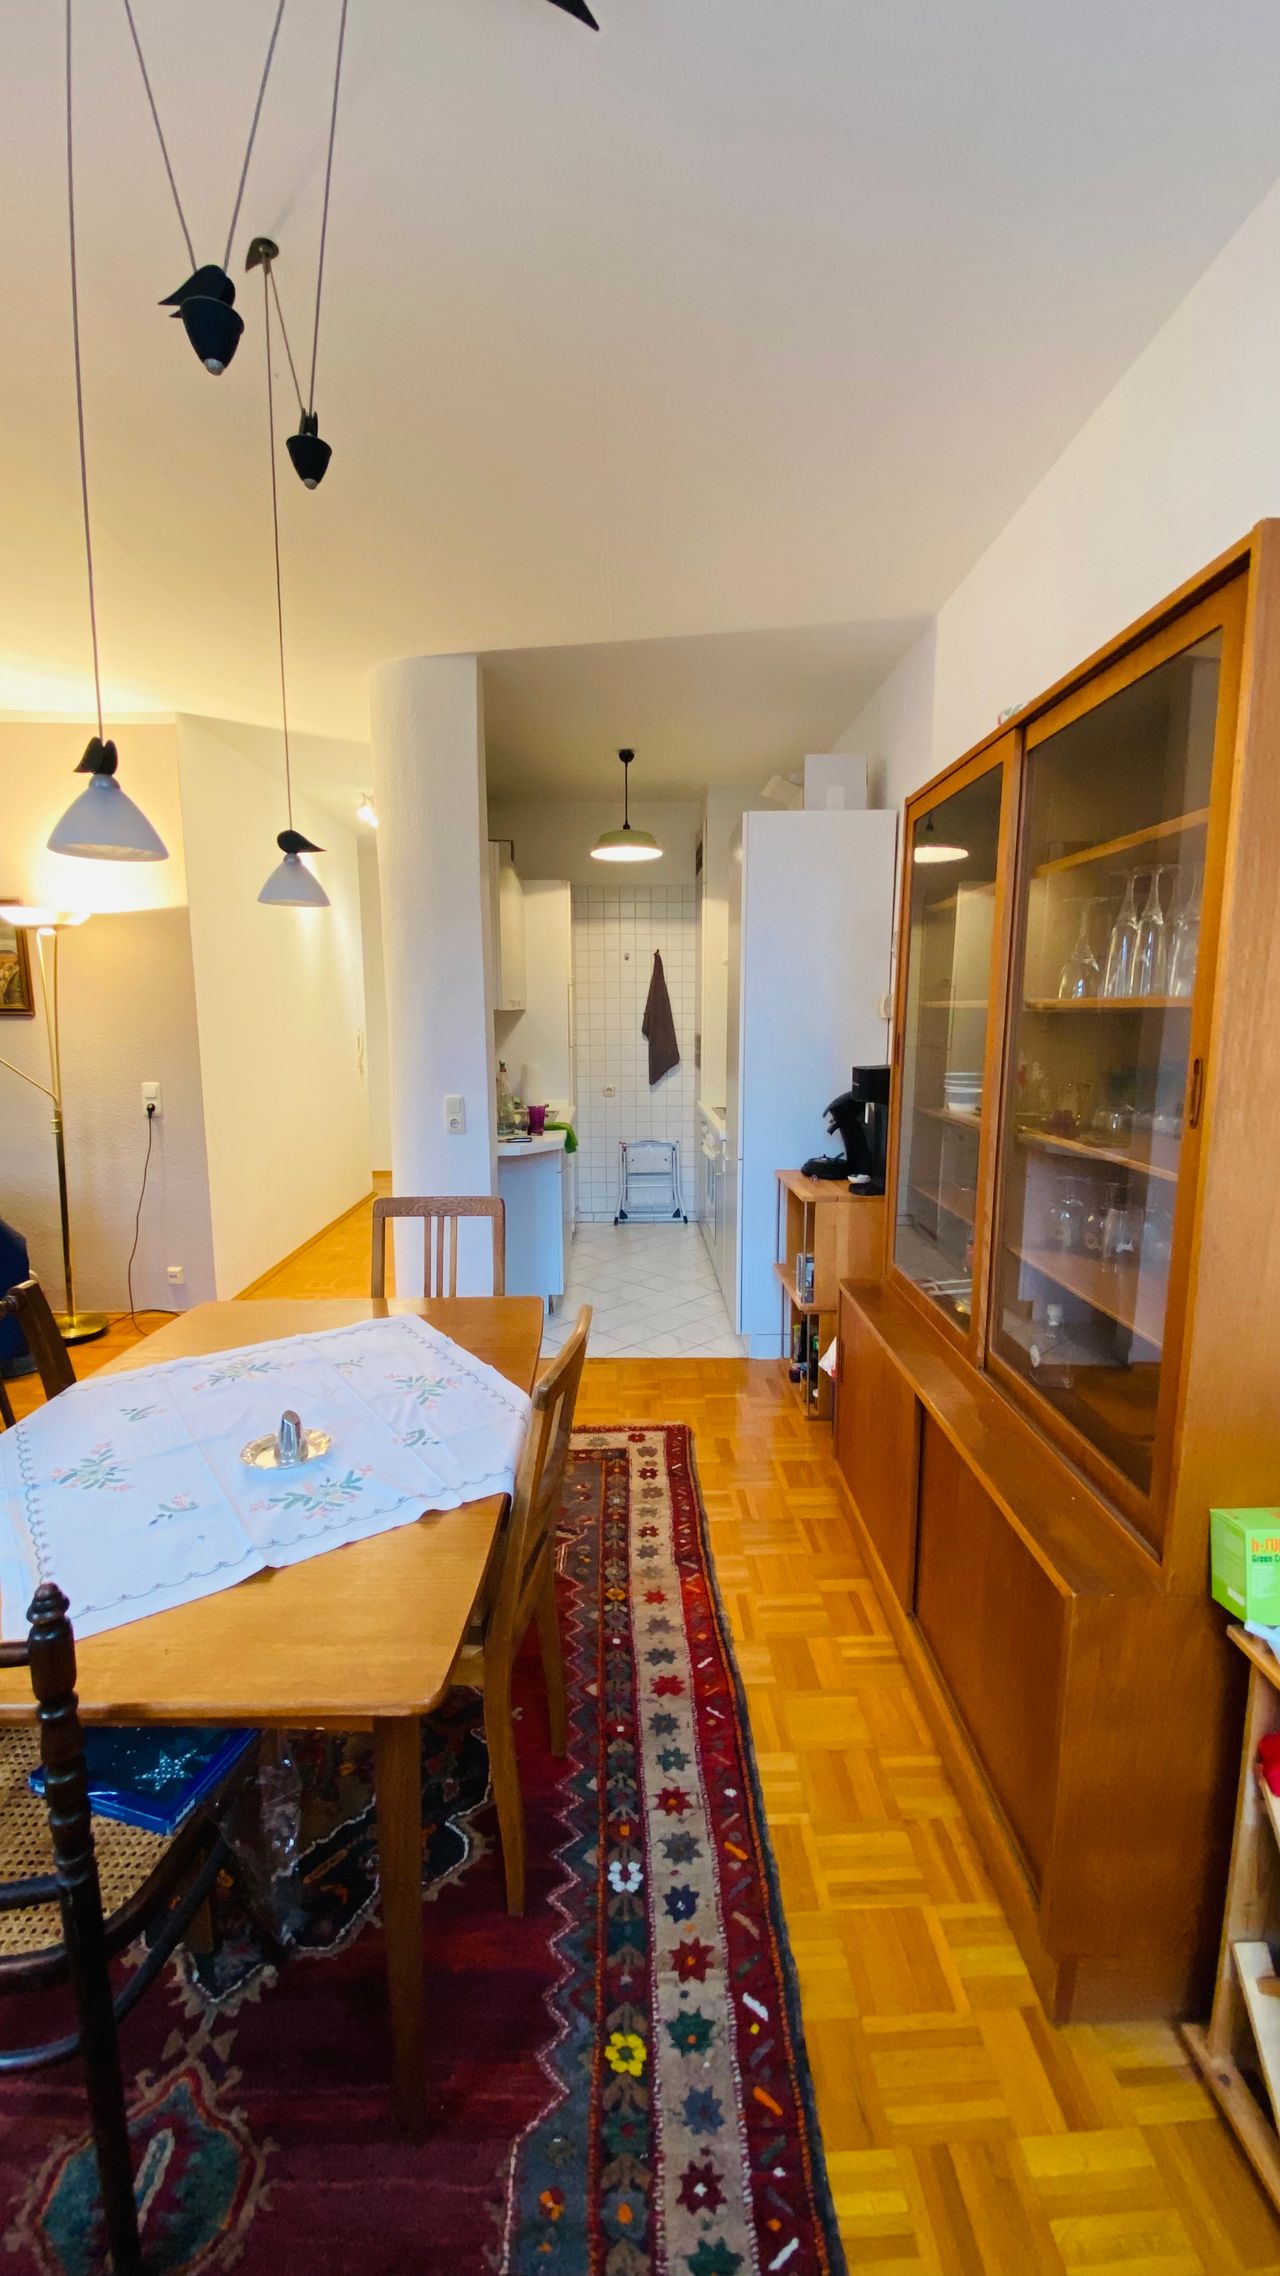 Lovely apartment in Mainz